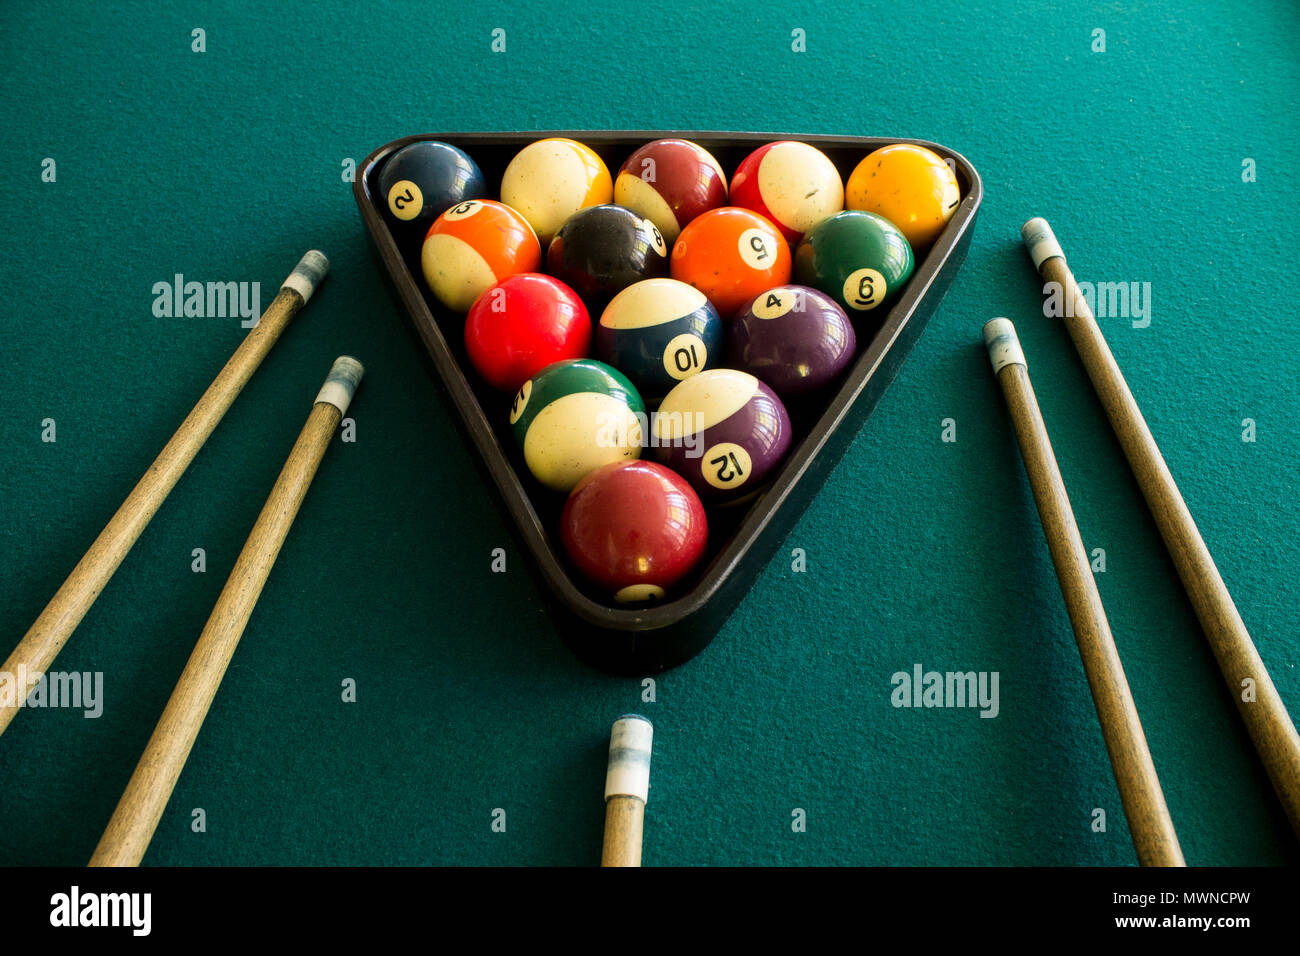 Symmetric view of billiard balls arranged in a triangle with cue sticks on  green table Stock Photo - Alamy